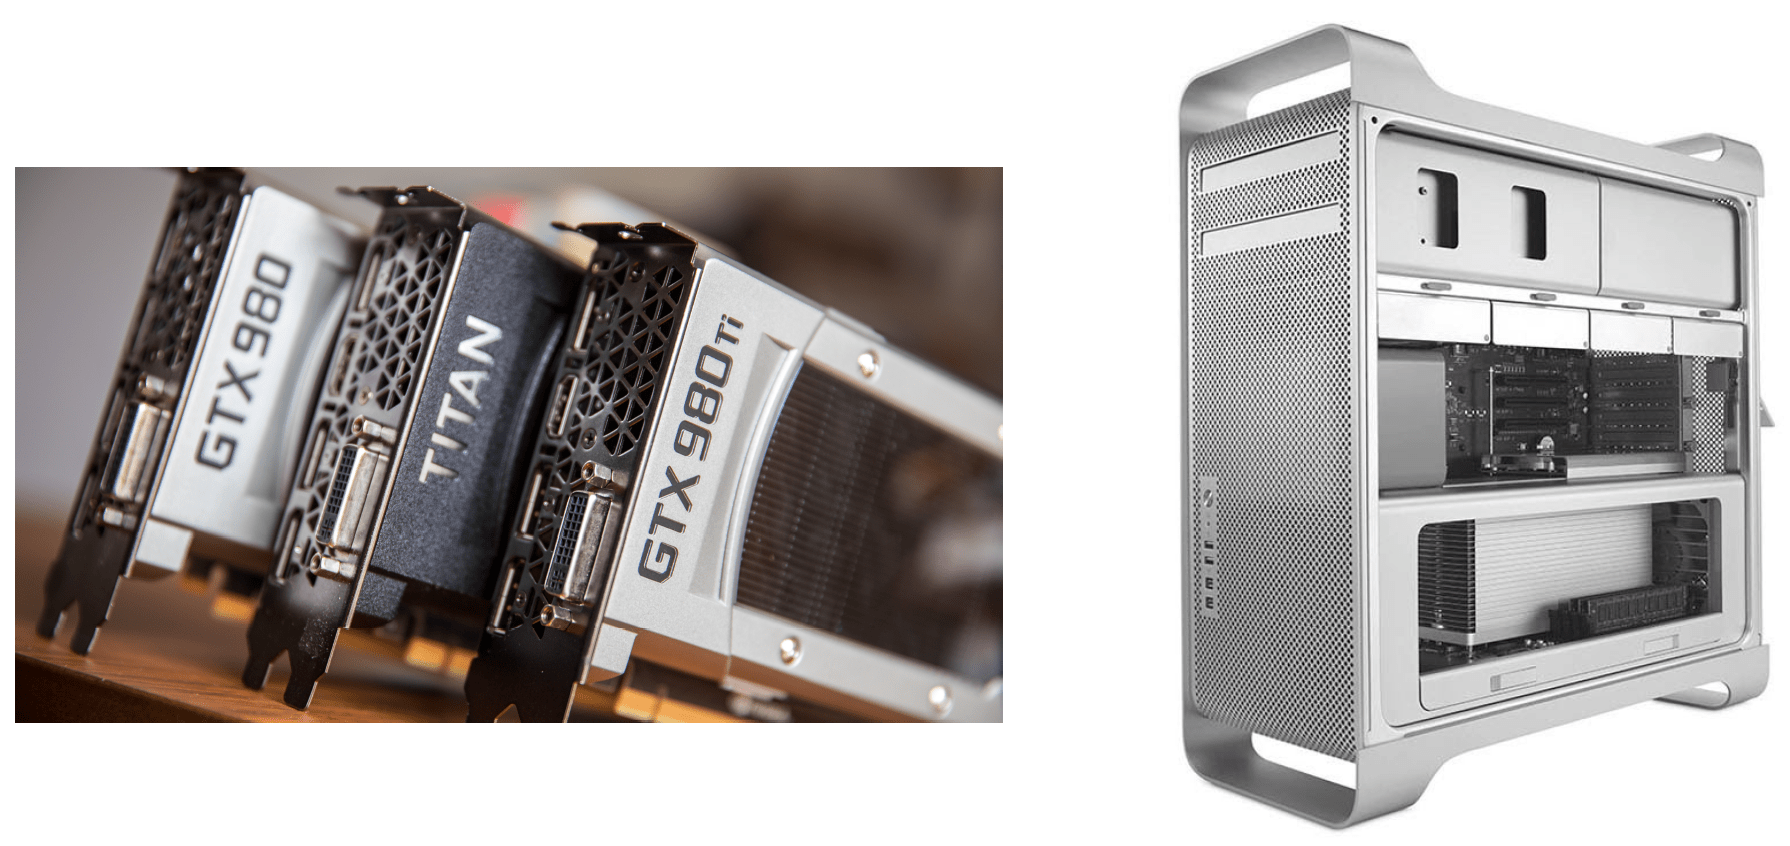 video card upgrades for mac pro 2.1 by serial number